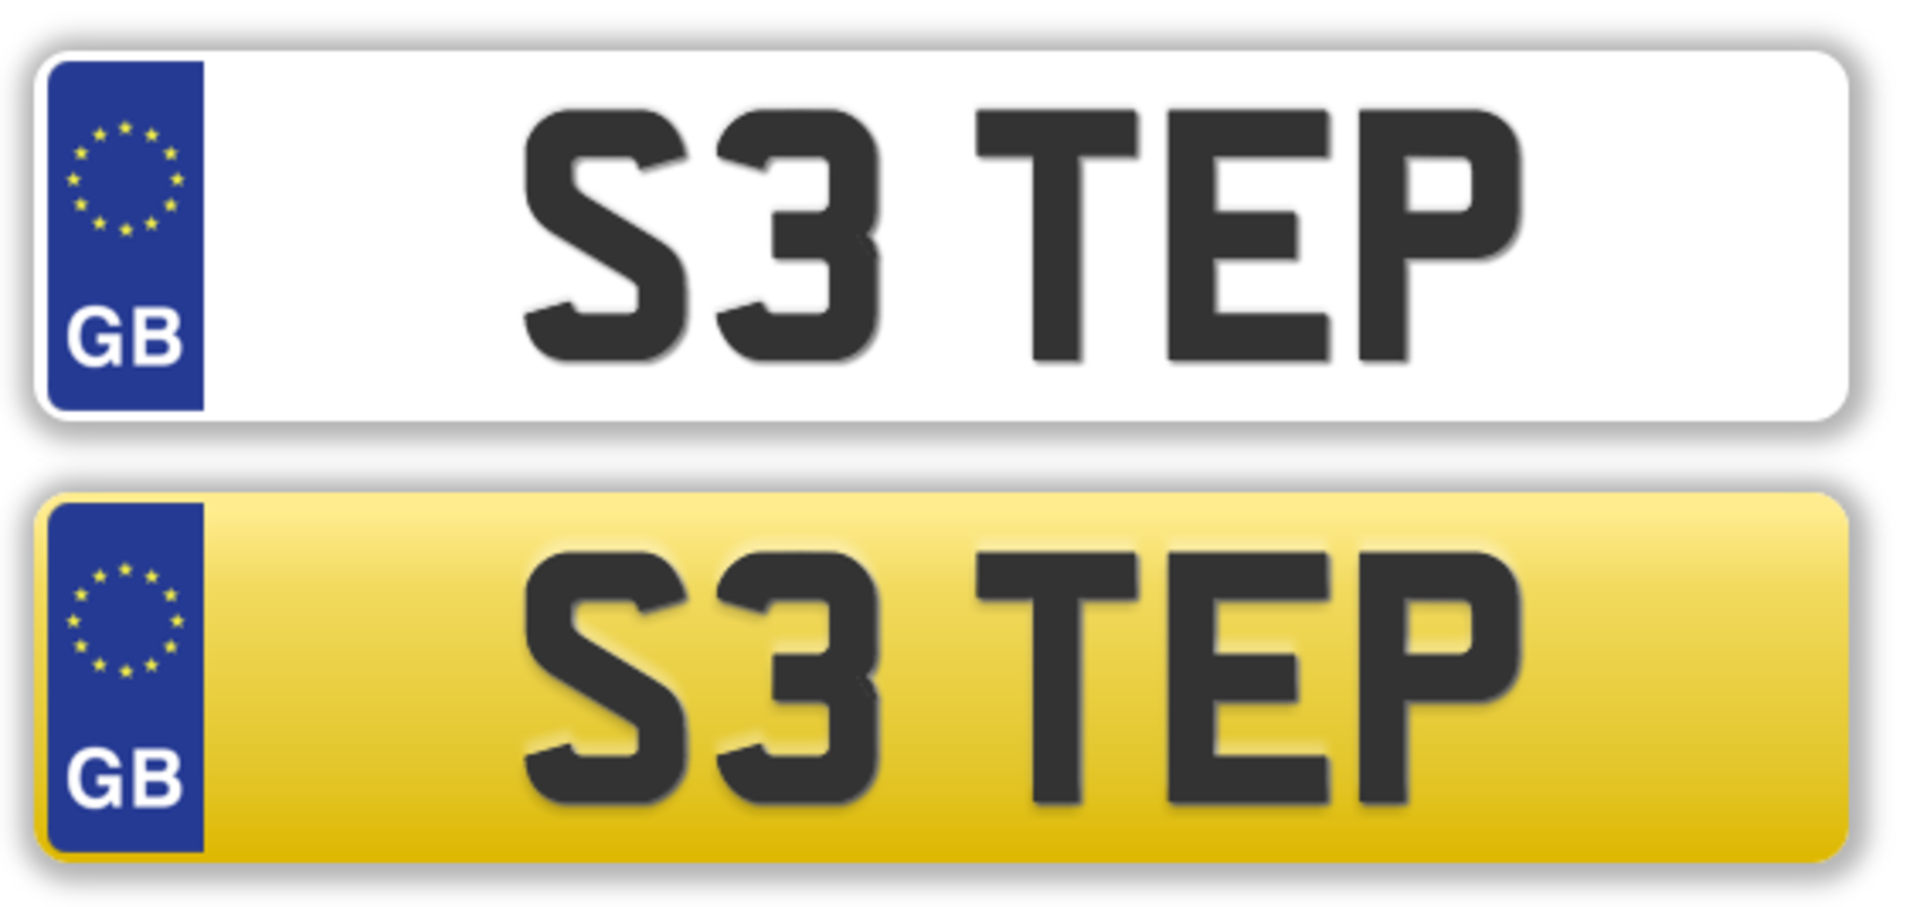 Cherished Plate - S3 TEP - No transfer fees. All registrations on retention and ready to transfer.